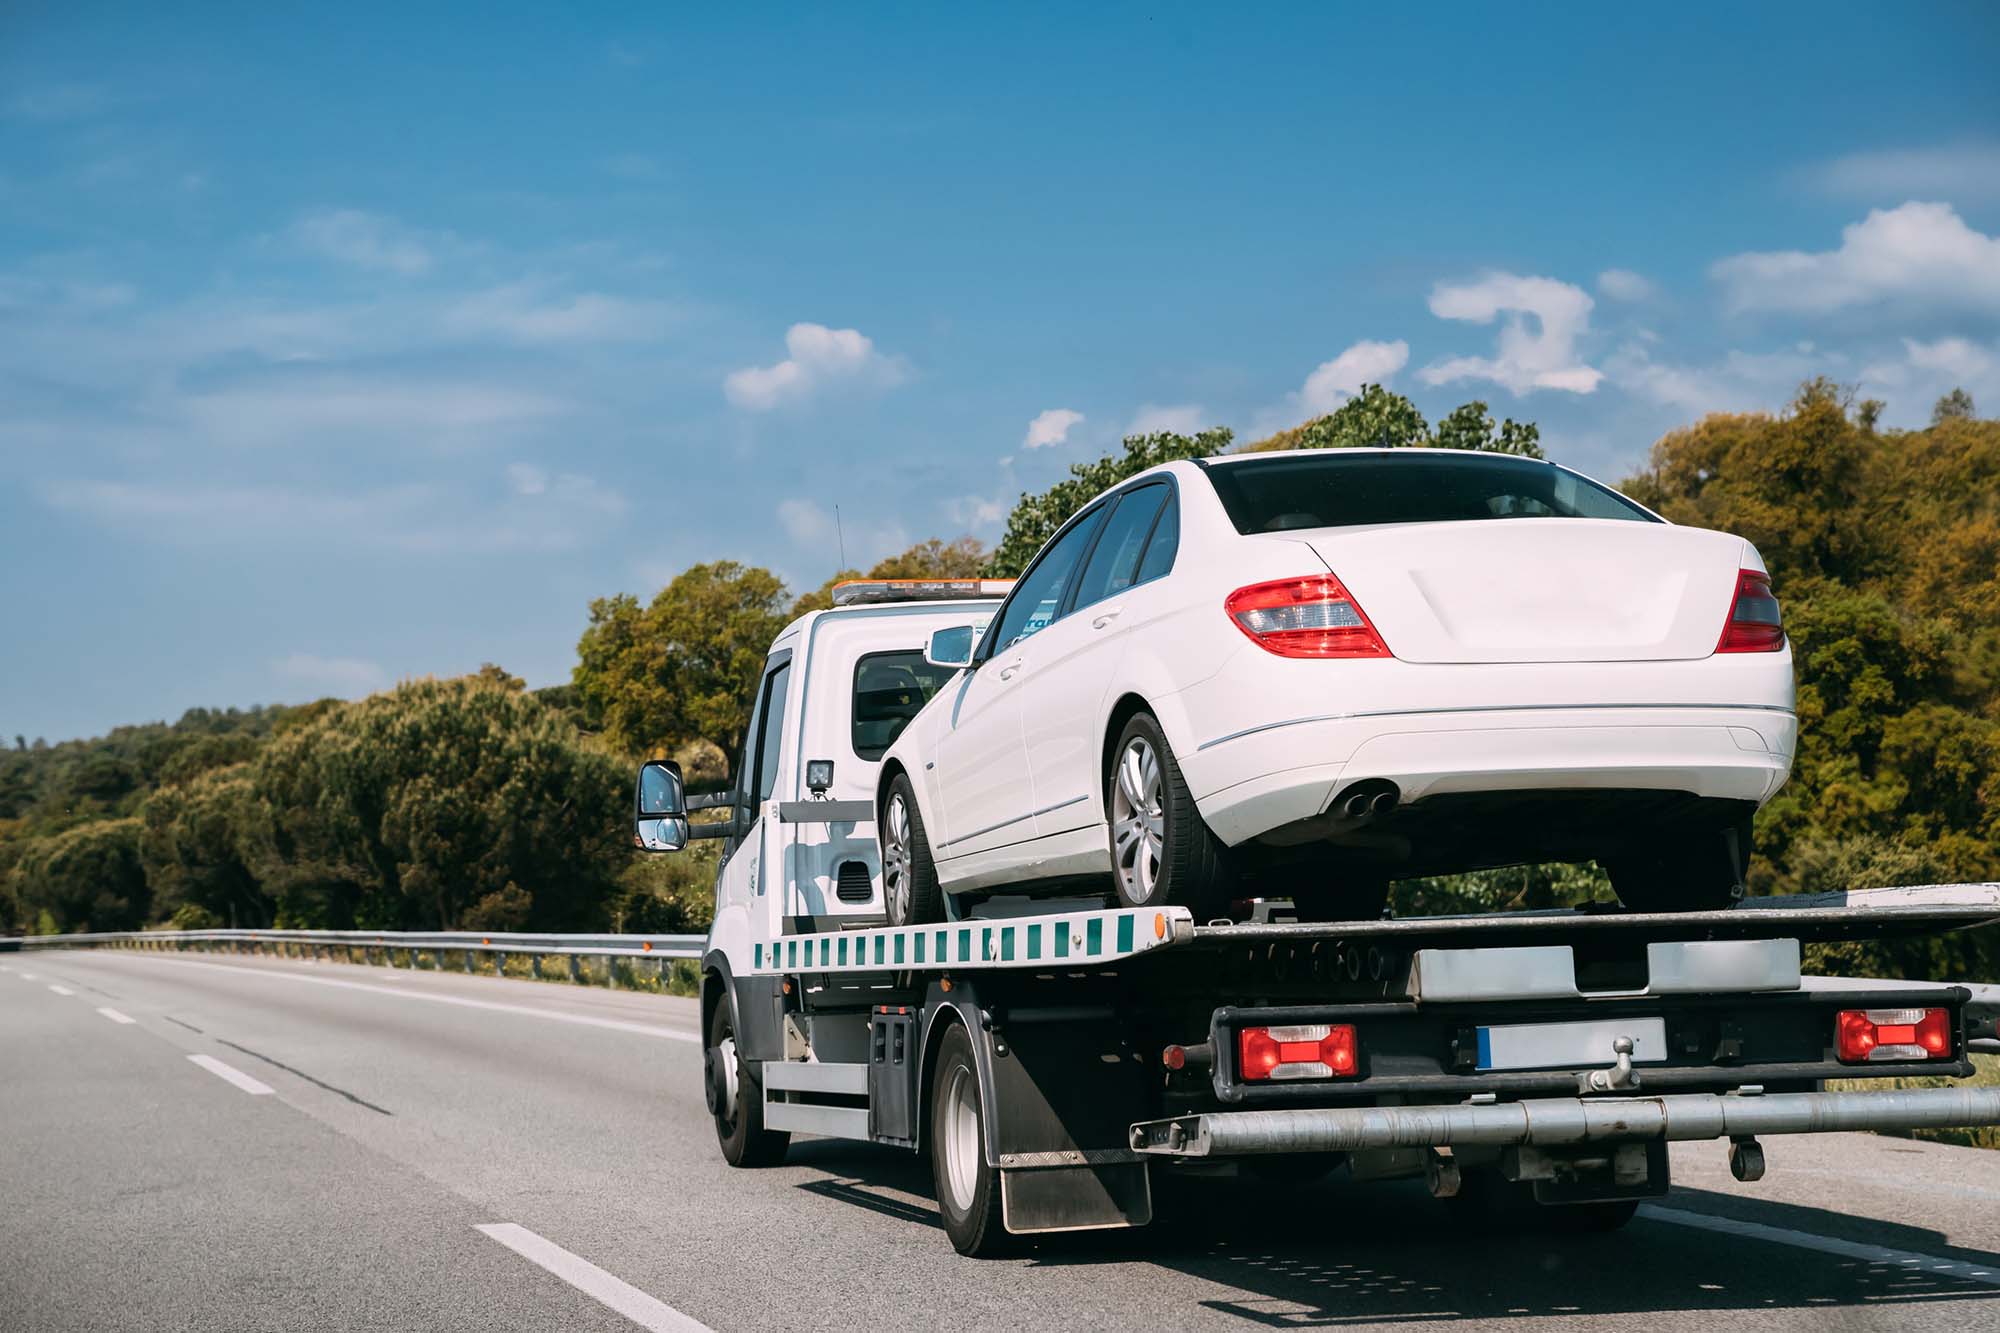 Car Service Transportation Concept. Tow Truck Transporting Car Or Help On Road Transports Wrecker Broken Car. Auto.